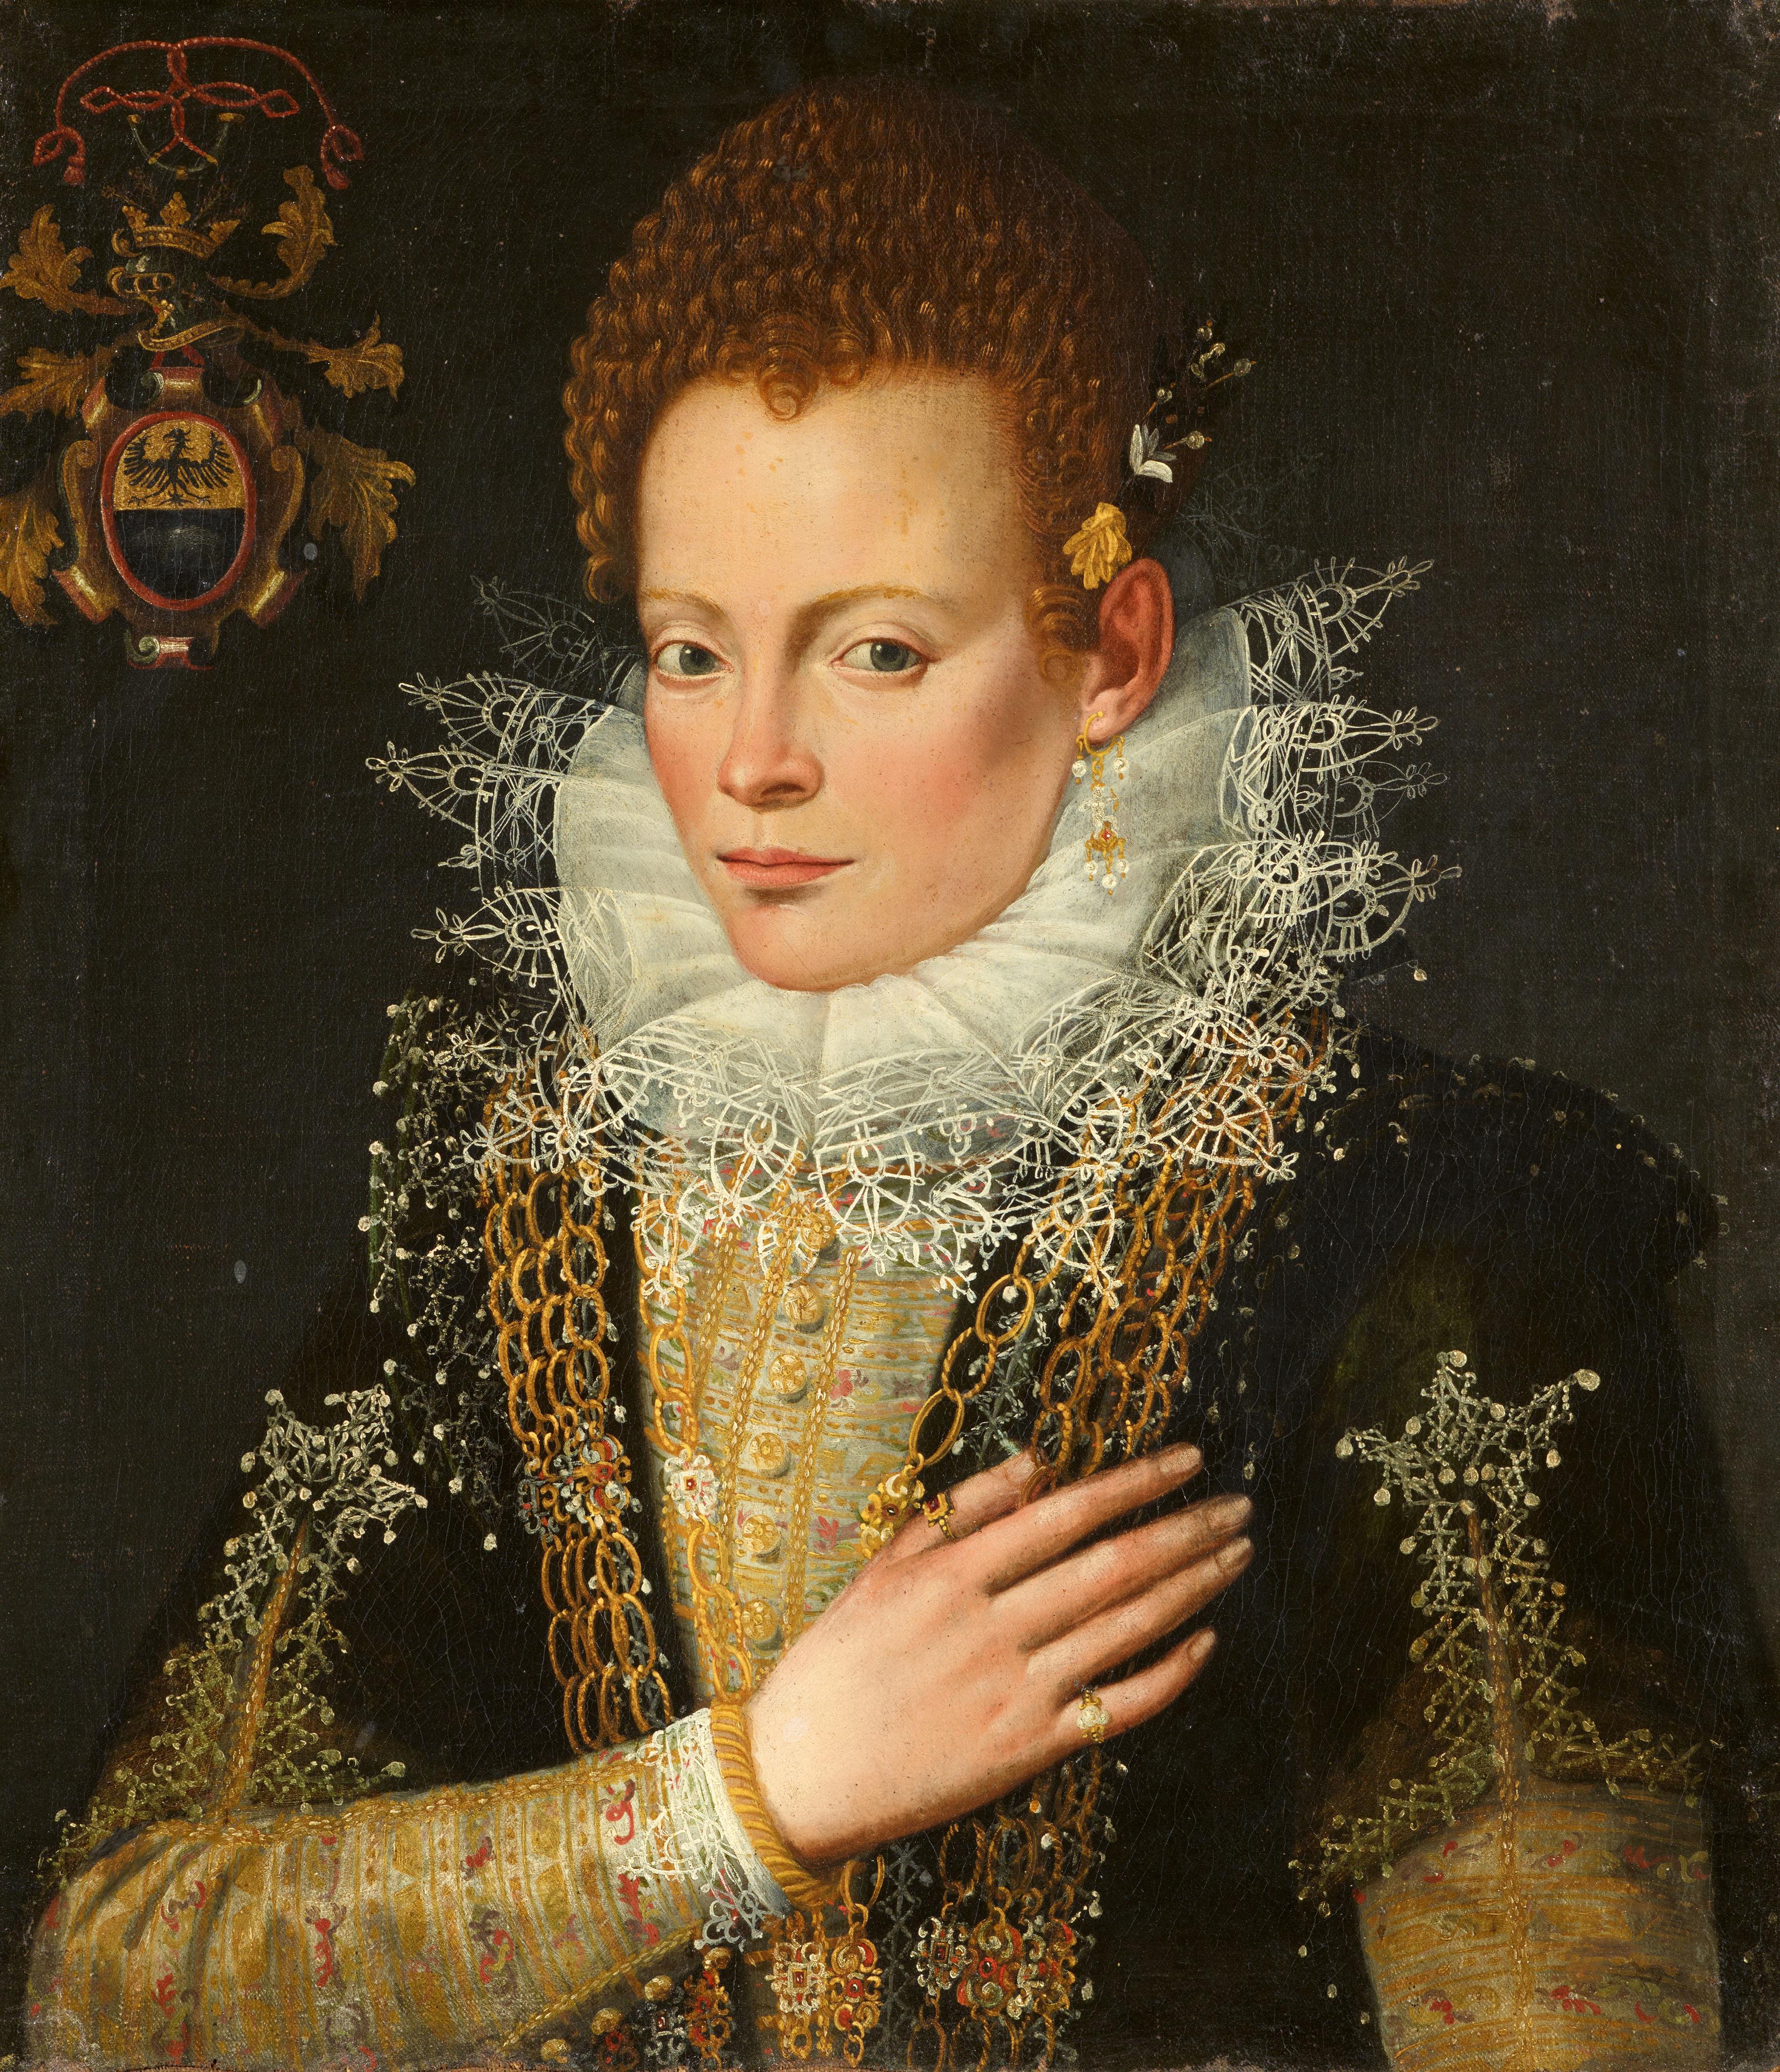 Flemish School around 1600 - Portrait of a Lady from the Family of Thurn und Taxis - image-1